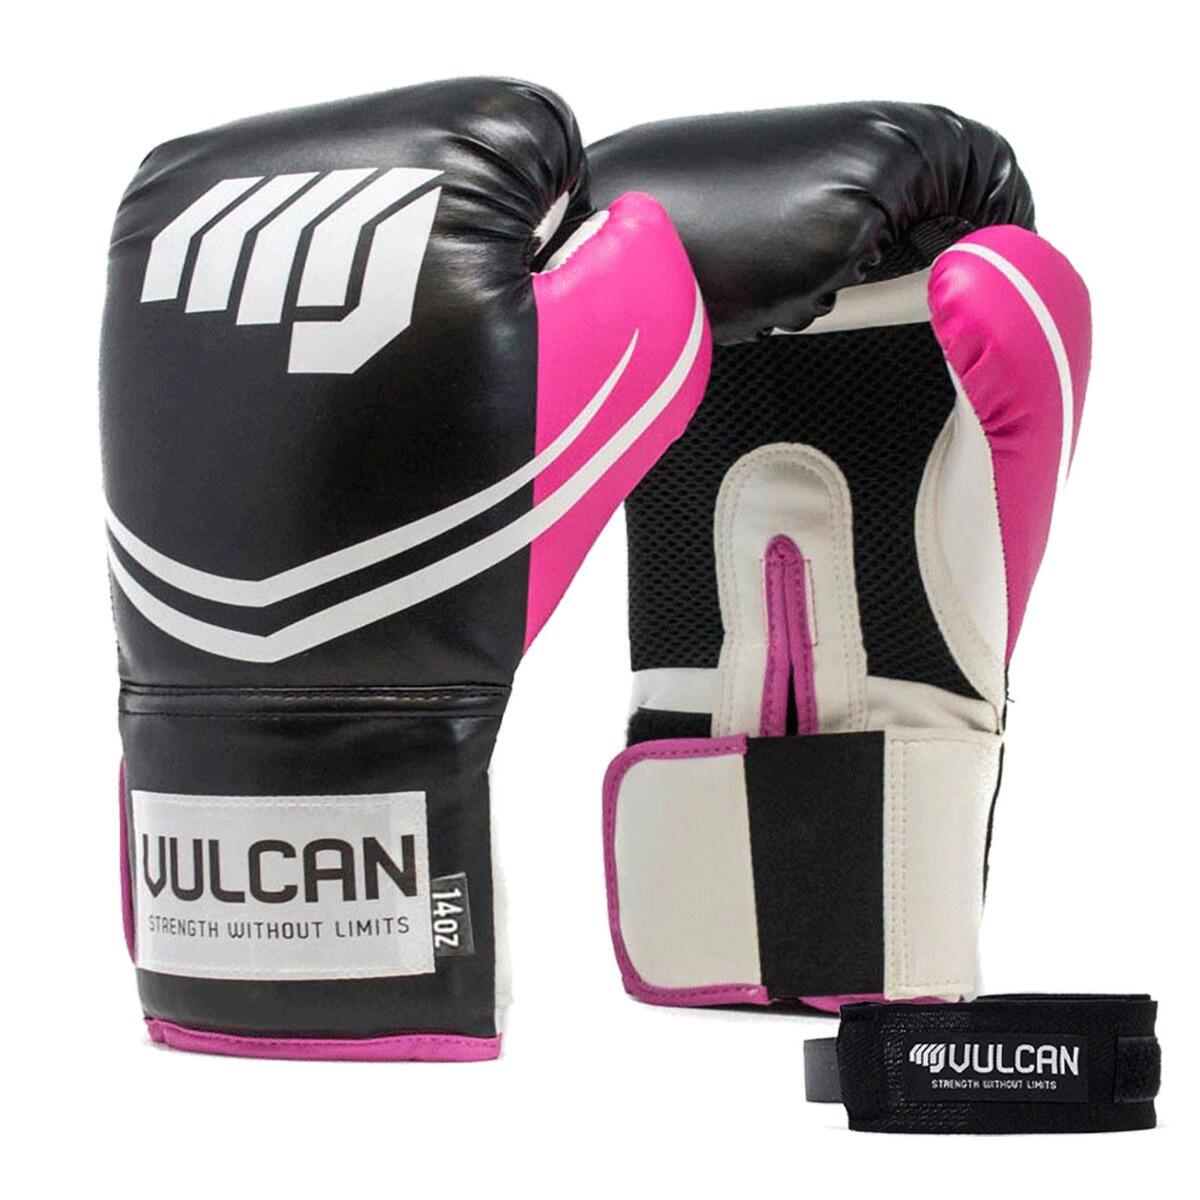 VULCAN BOXING GLOVES 14oz PINK/BLACK WITH HANDWRAPS 1/7